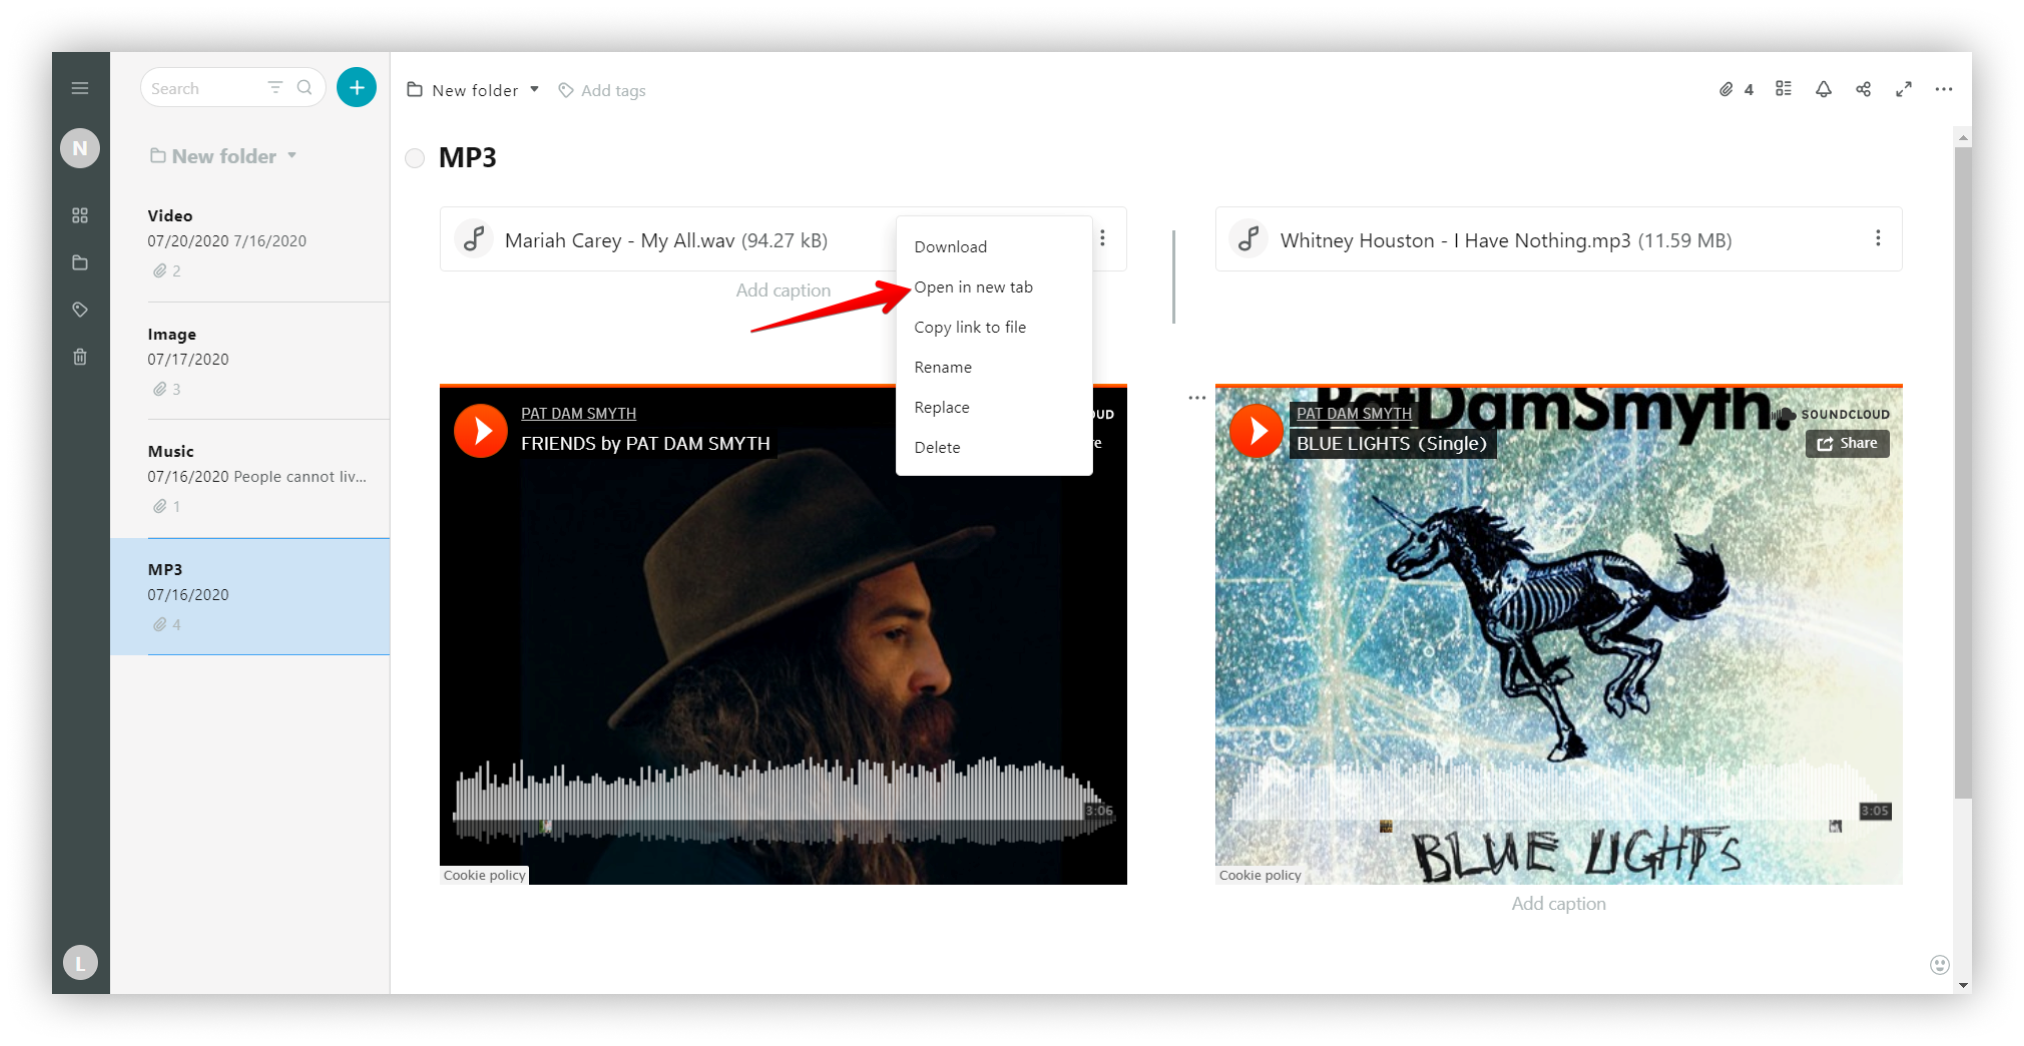 To open an audio in a new tab, click on the three dots menu and select Open in new tab.